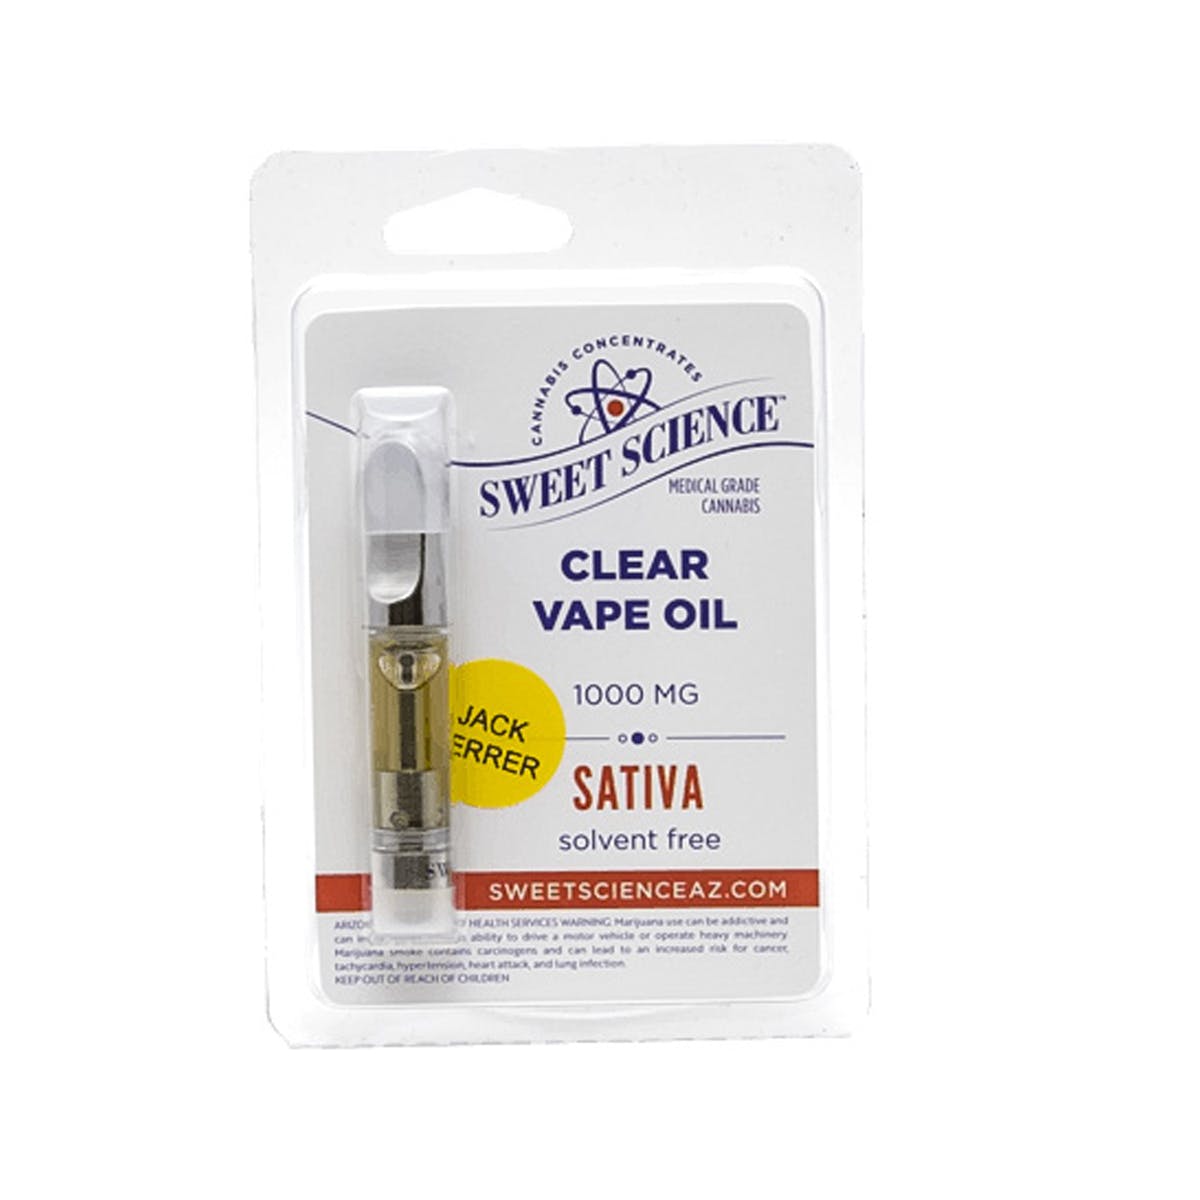 concentrate-sweet-science-concentrates-jack-herer-sativa-sweet-science-cartridge